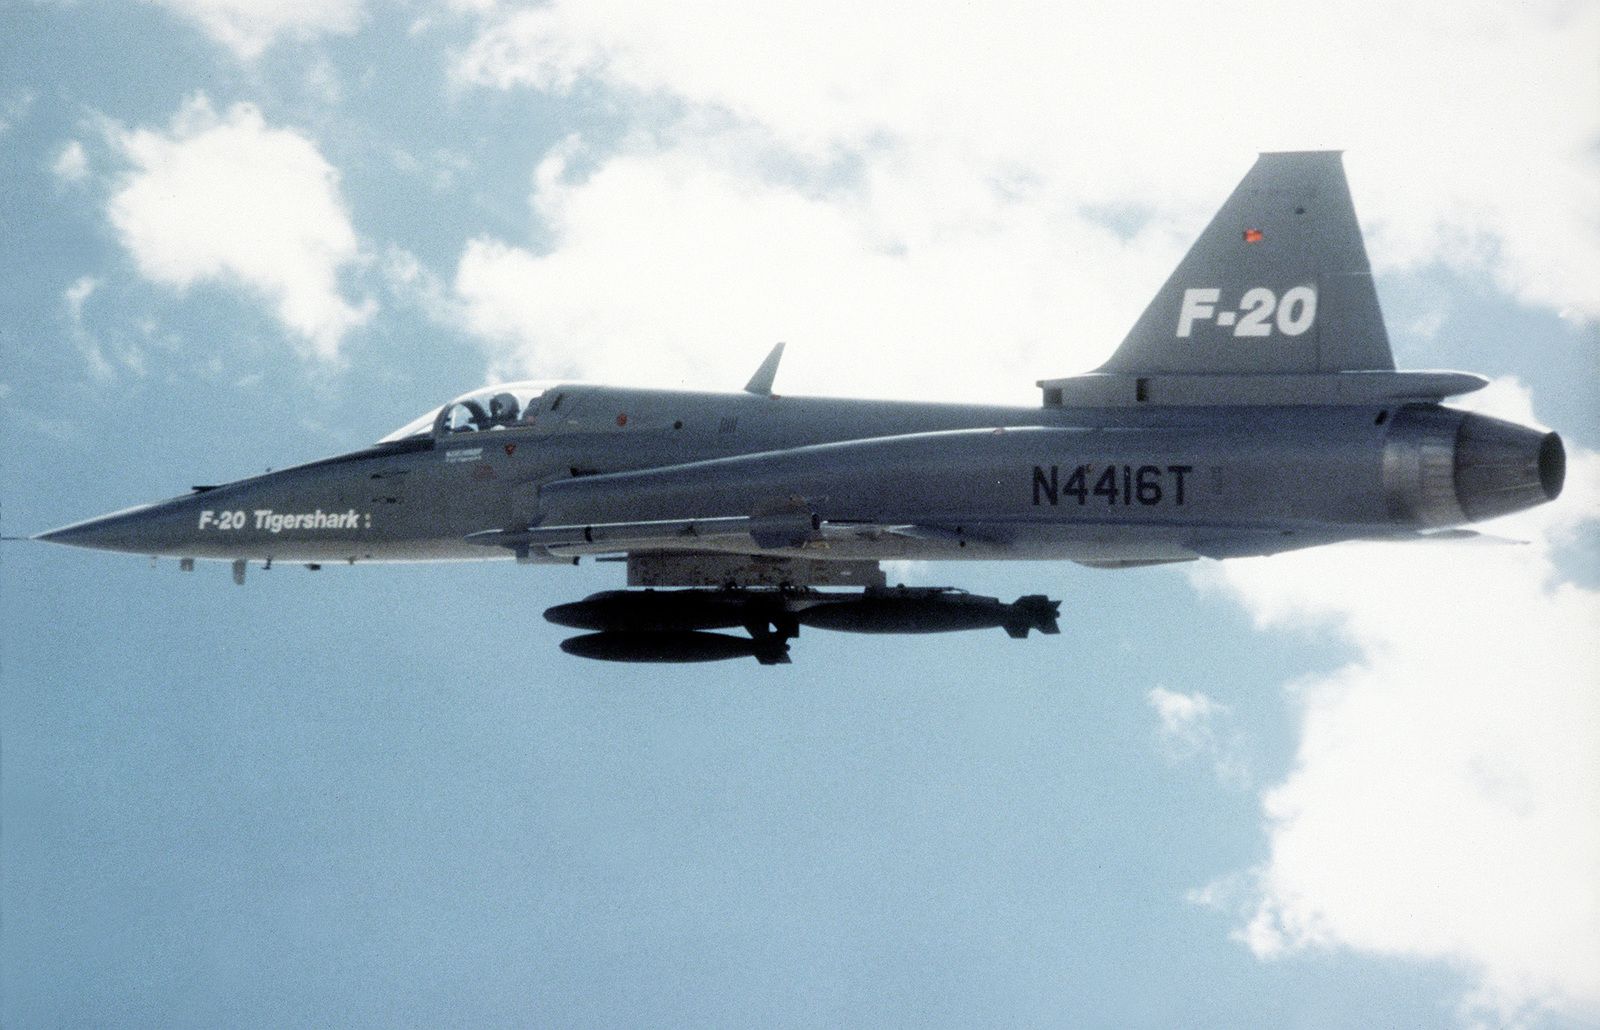 an-air-to-air-left-side-view-of-a-northrop-f-20-tigershark-aircraft-armed-with-e6ca2f-1600.jpg